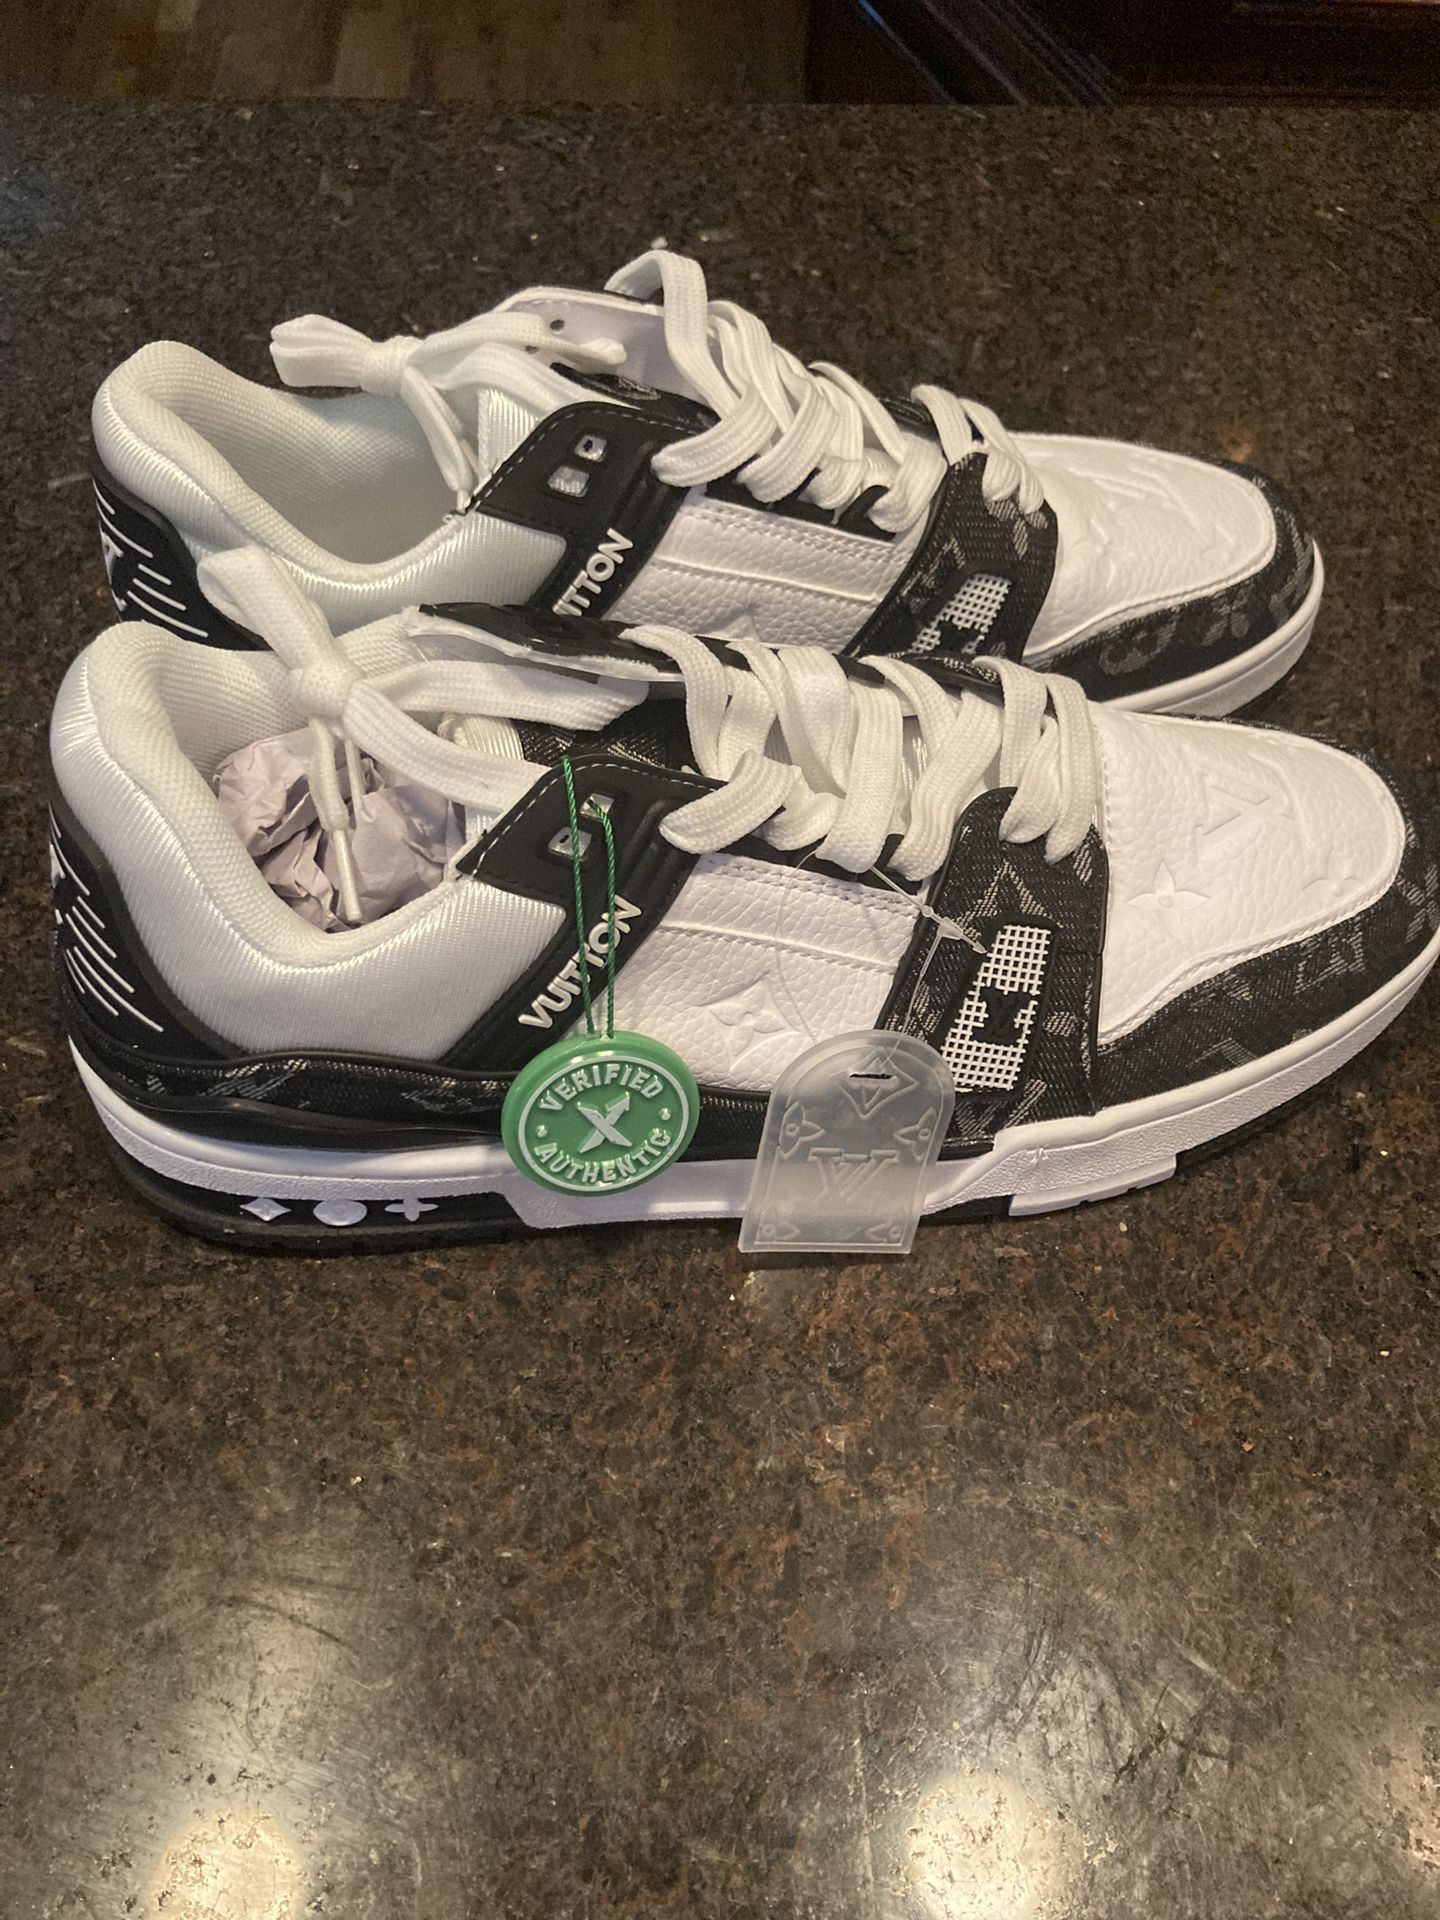 Louis Vuitton Trainers 11 for Sale in Sauk Village, IL - OfferUp